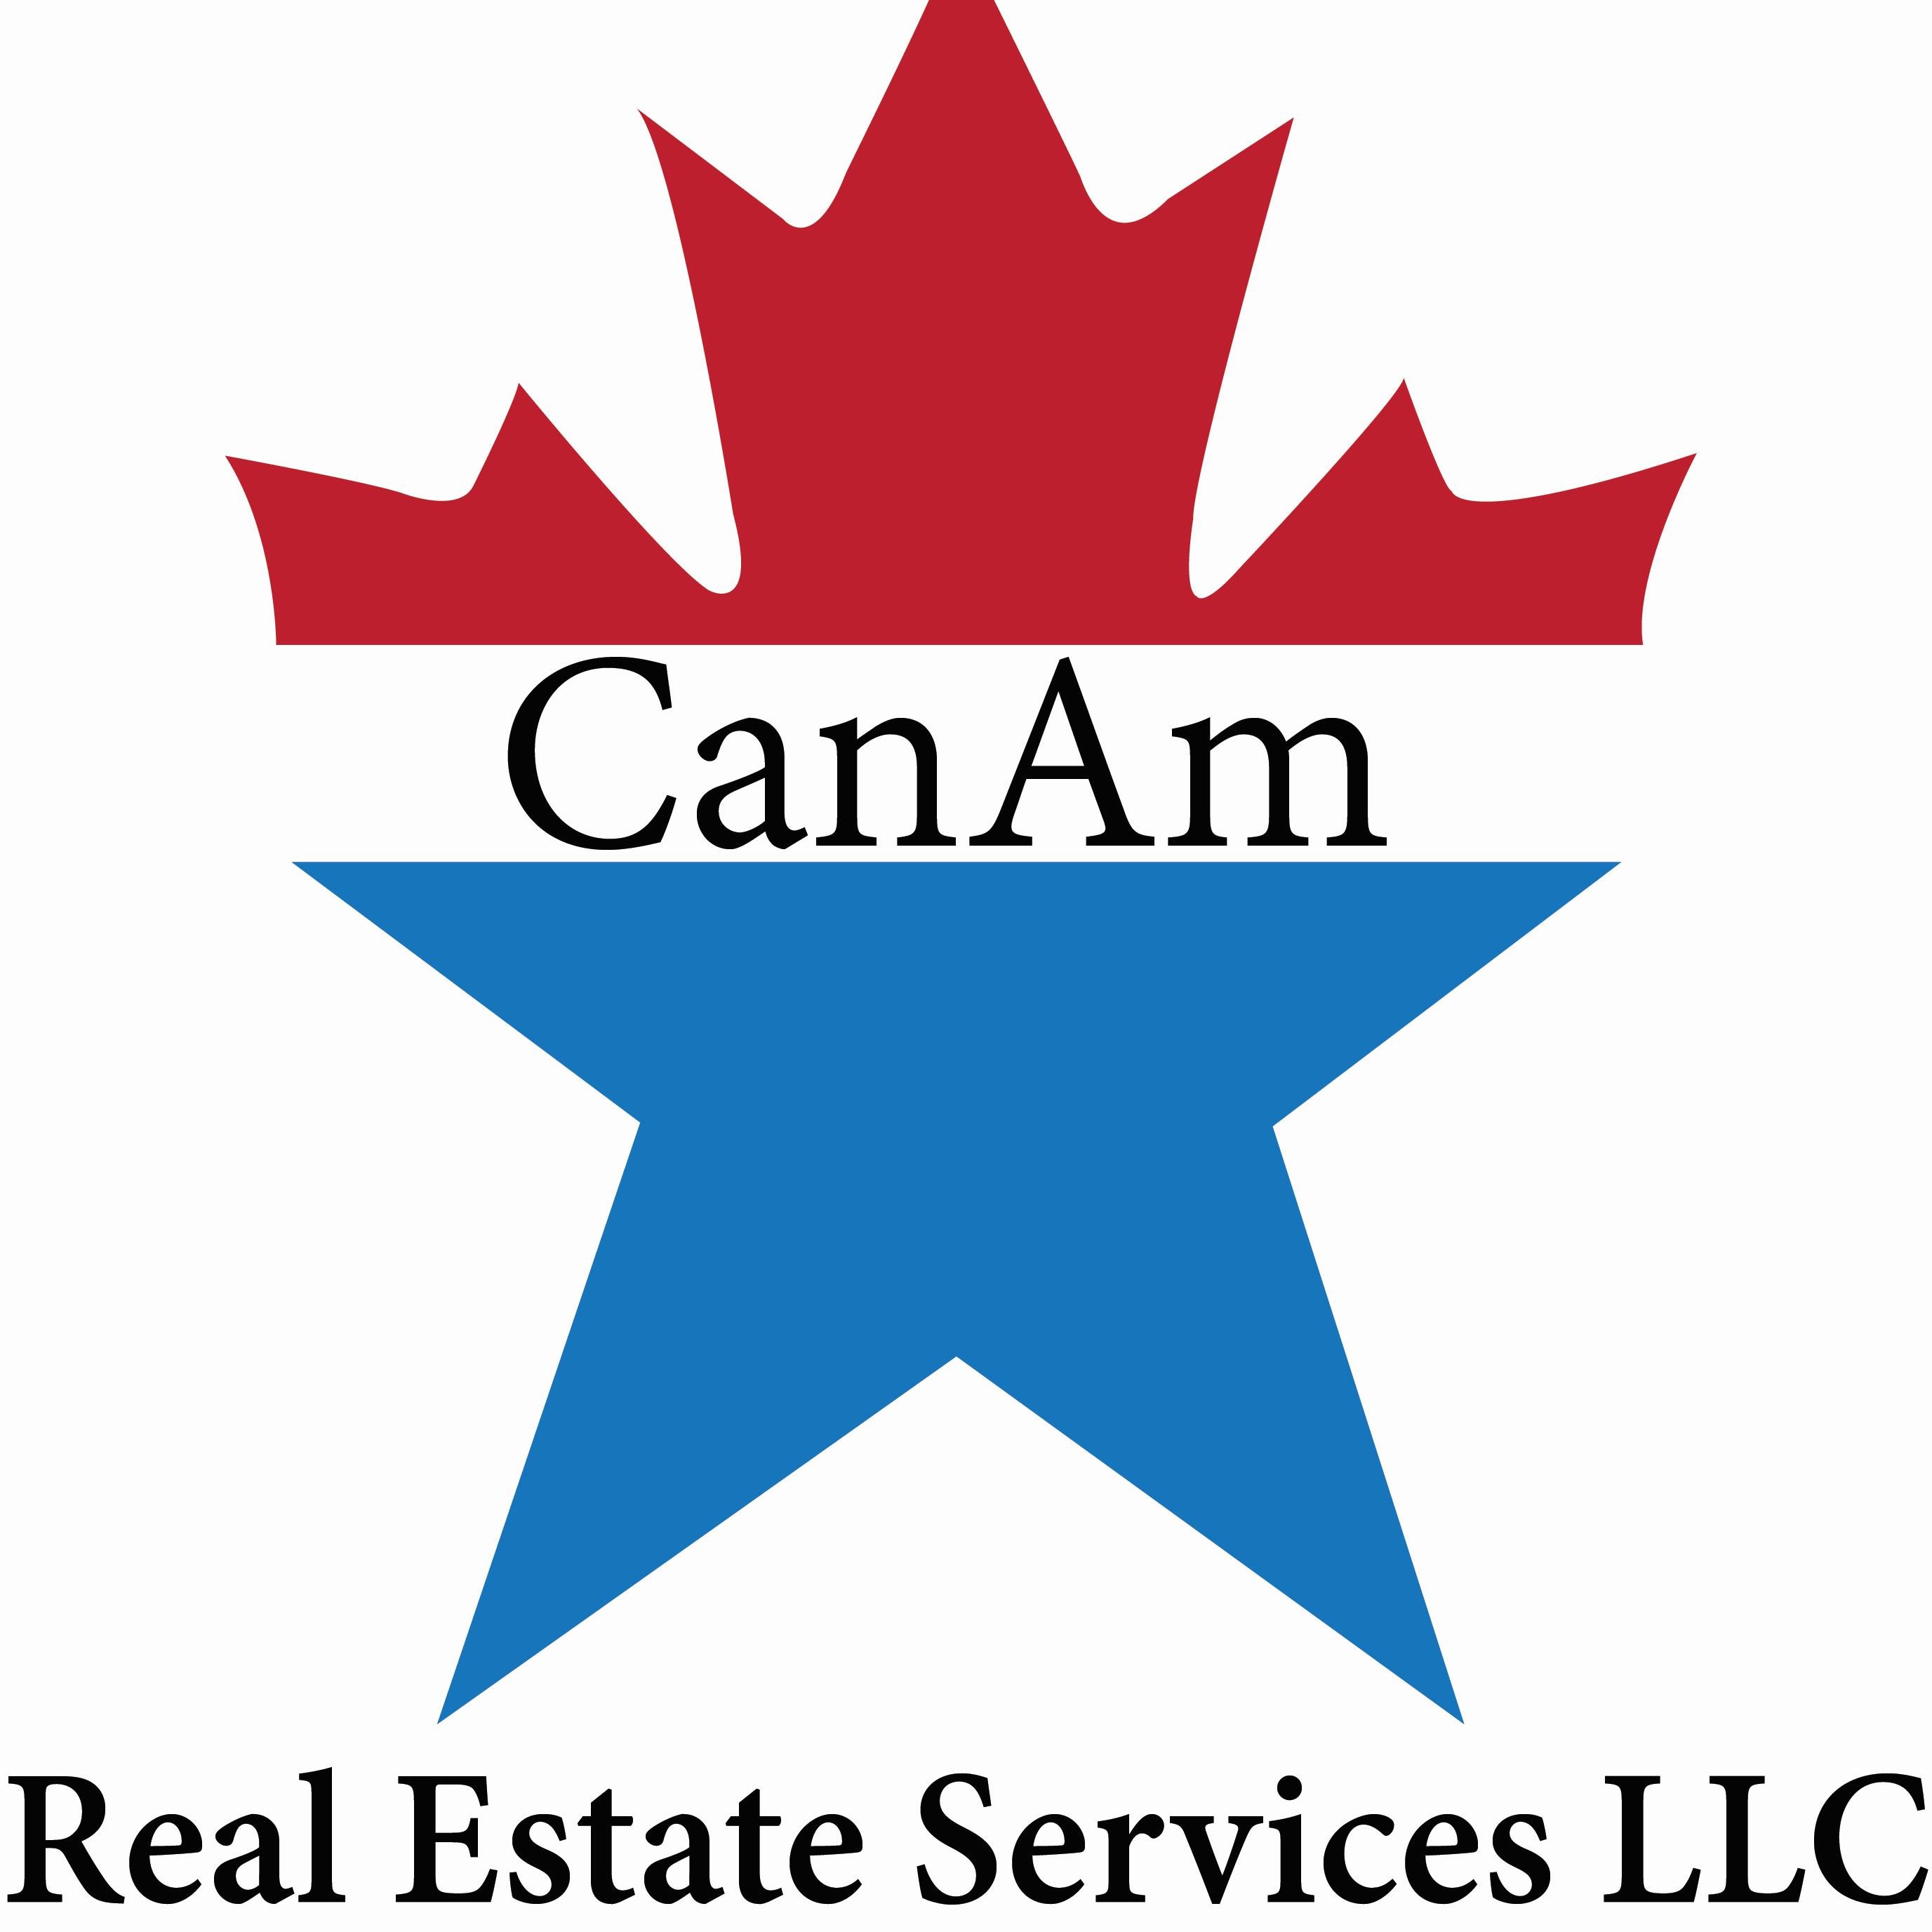 Protect your #investment by hiring only the best #realestate service around – CanAm Real Estate Services, LLC.